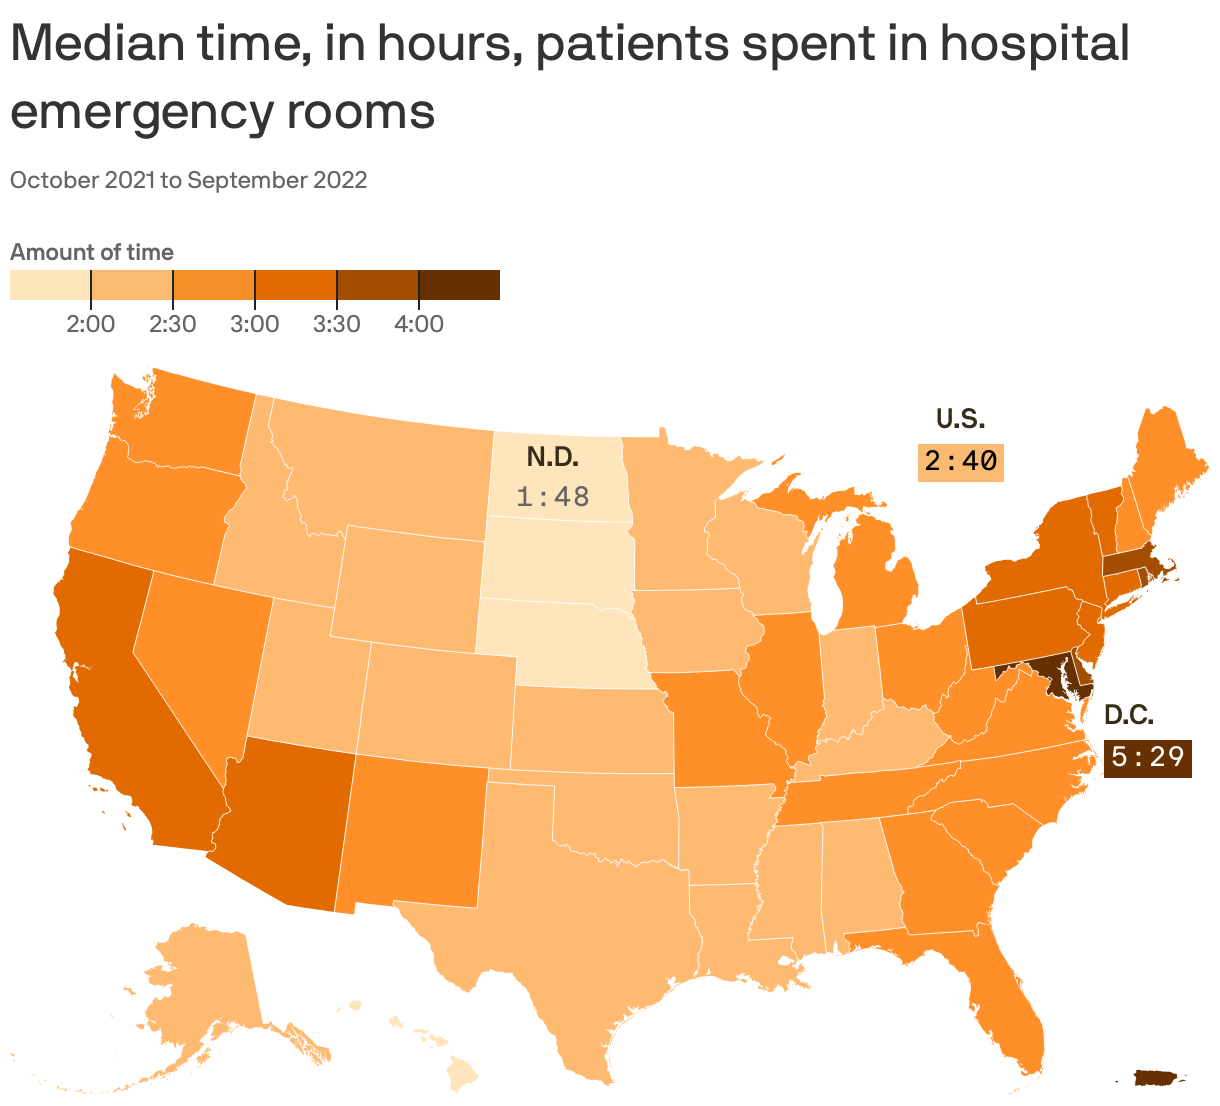 Median time, in hours, patients spent in hospital emergency rooms